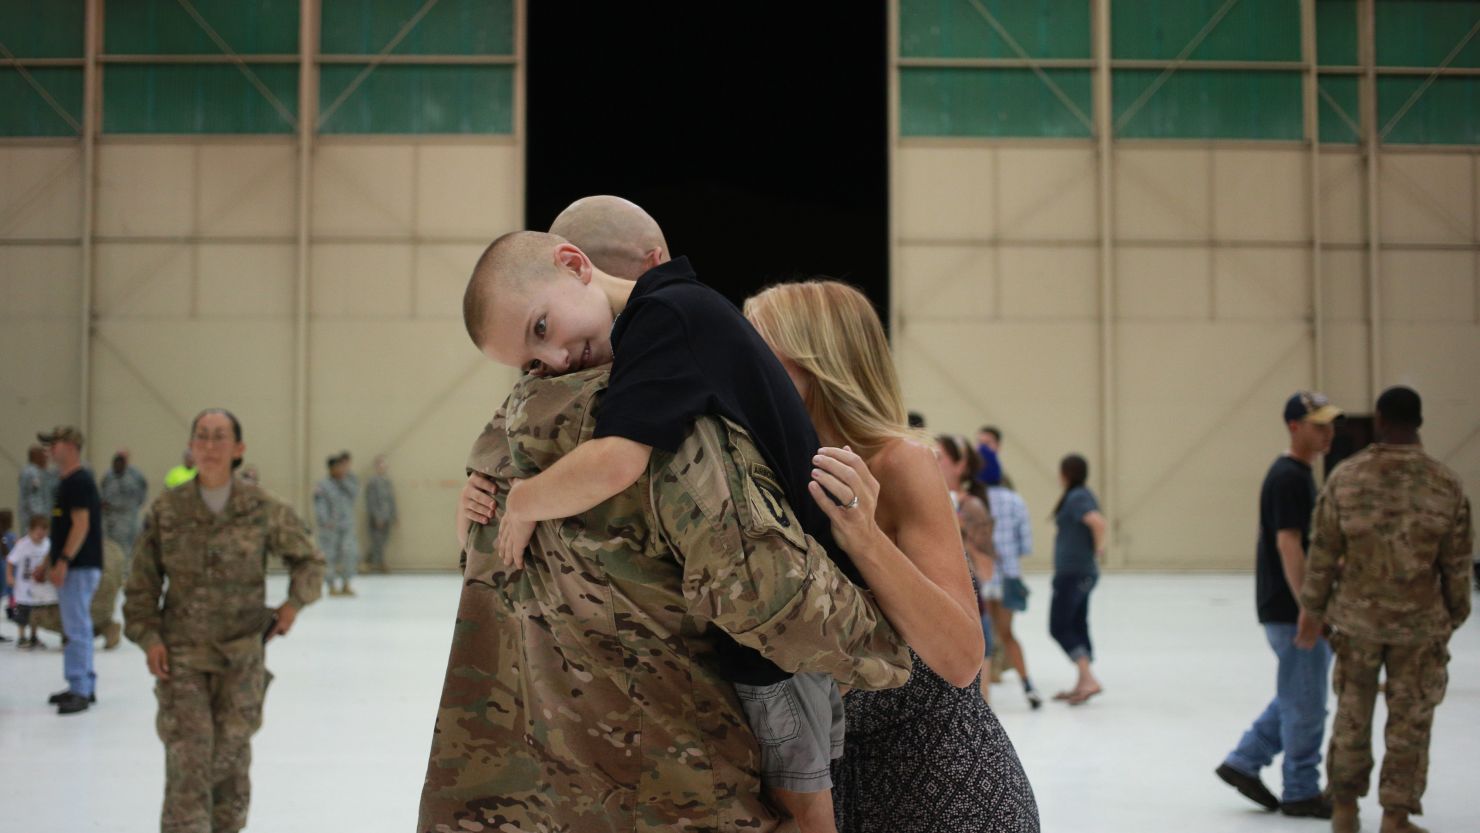 Bradyn Vest hugs his dad, Sgt. 1st Class Kevin Vest, after a homecoming ceremony September 1 in Fort Campbell, Kentucky.  